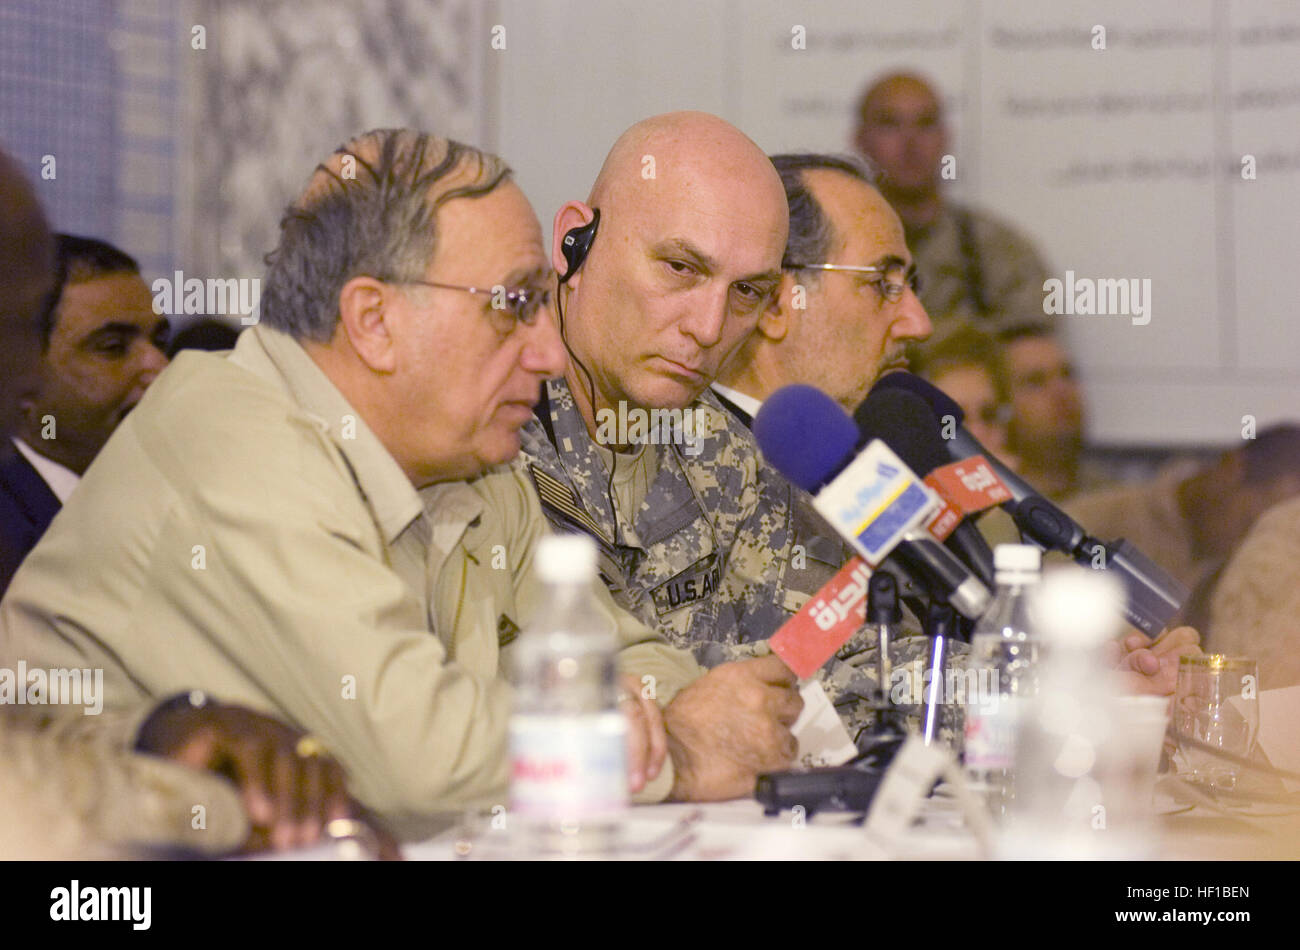 The Minister of Defense Abd al-Qadir al Mufriji (left), Commanding Gerenal of Multi-National Core Iraq, Lt. Gen. Raymond T. Odierno (center) and National Security Advisor Dr. Mowaffak al-Rubaie Suid (right) attended the Al Anbar security conference. Multi-National Forces West hosted the Al Anbar security conference at the 7th Iraqi Army Headquarters at Camp Blue Diamond, Iraq. II Marine Expeditionary Force is deployed with Multi-National Forces West in support of Operation Iraqi Freedom in the Al Anbar province of Iraq to develop Iraqi security forces, facilitate the development of a market ba Stock Photo